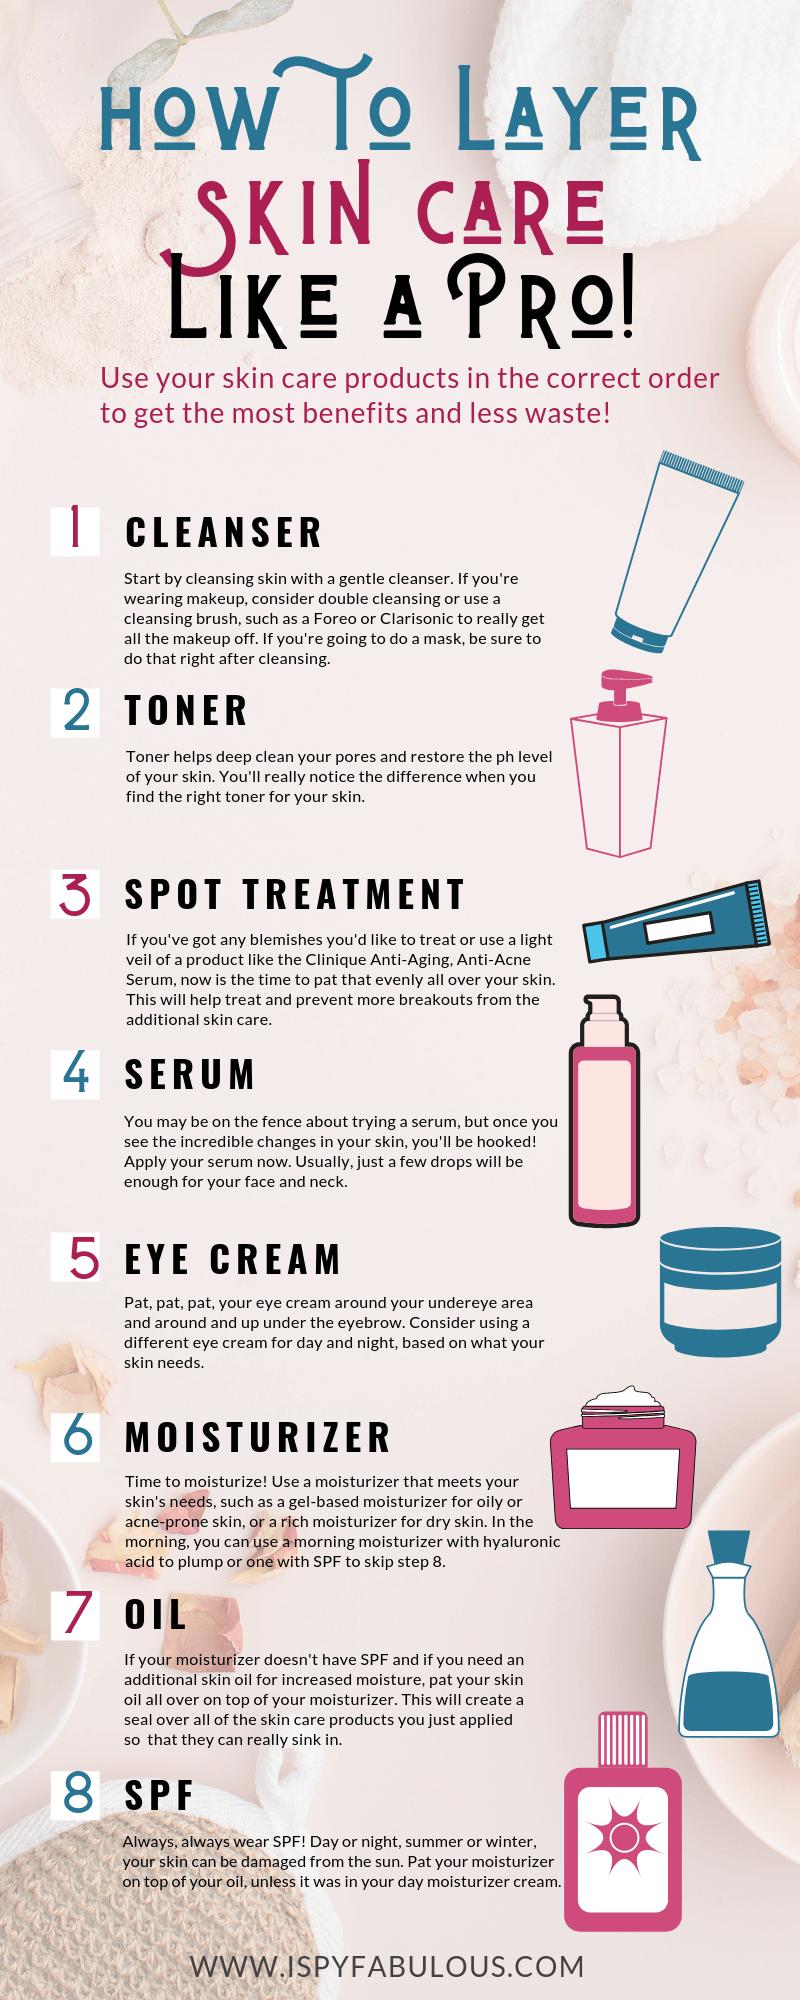 How To Layer Your Skincare Like a Pro! - I Spy Fabulous -   17 skin care Serum products ideas